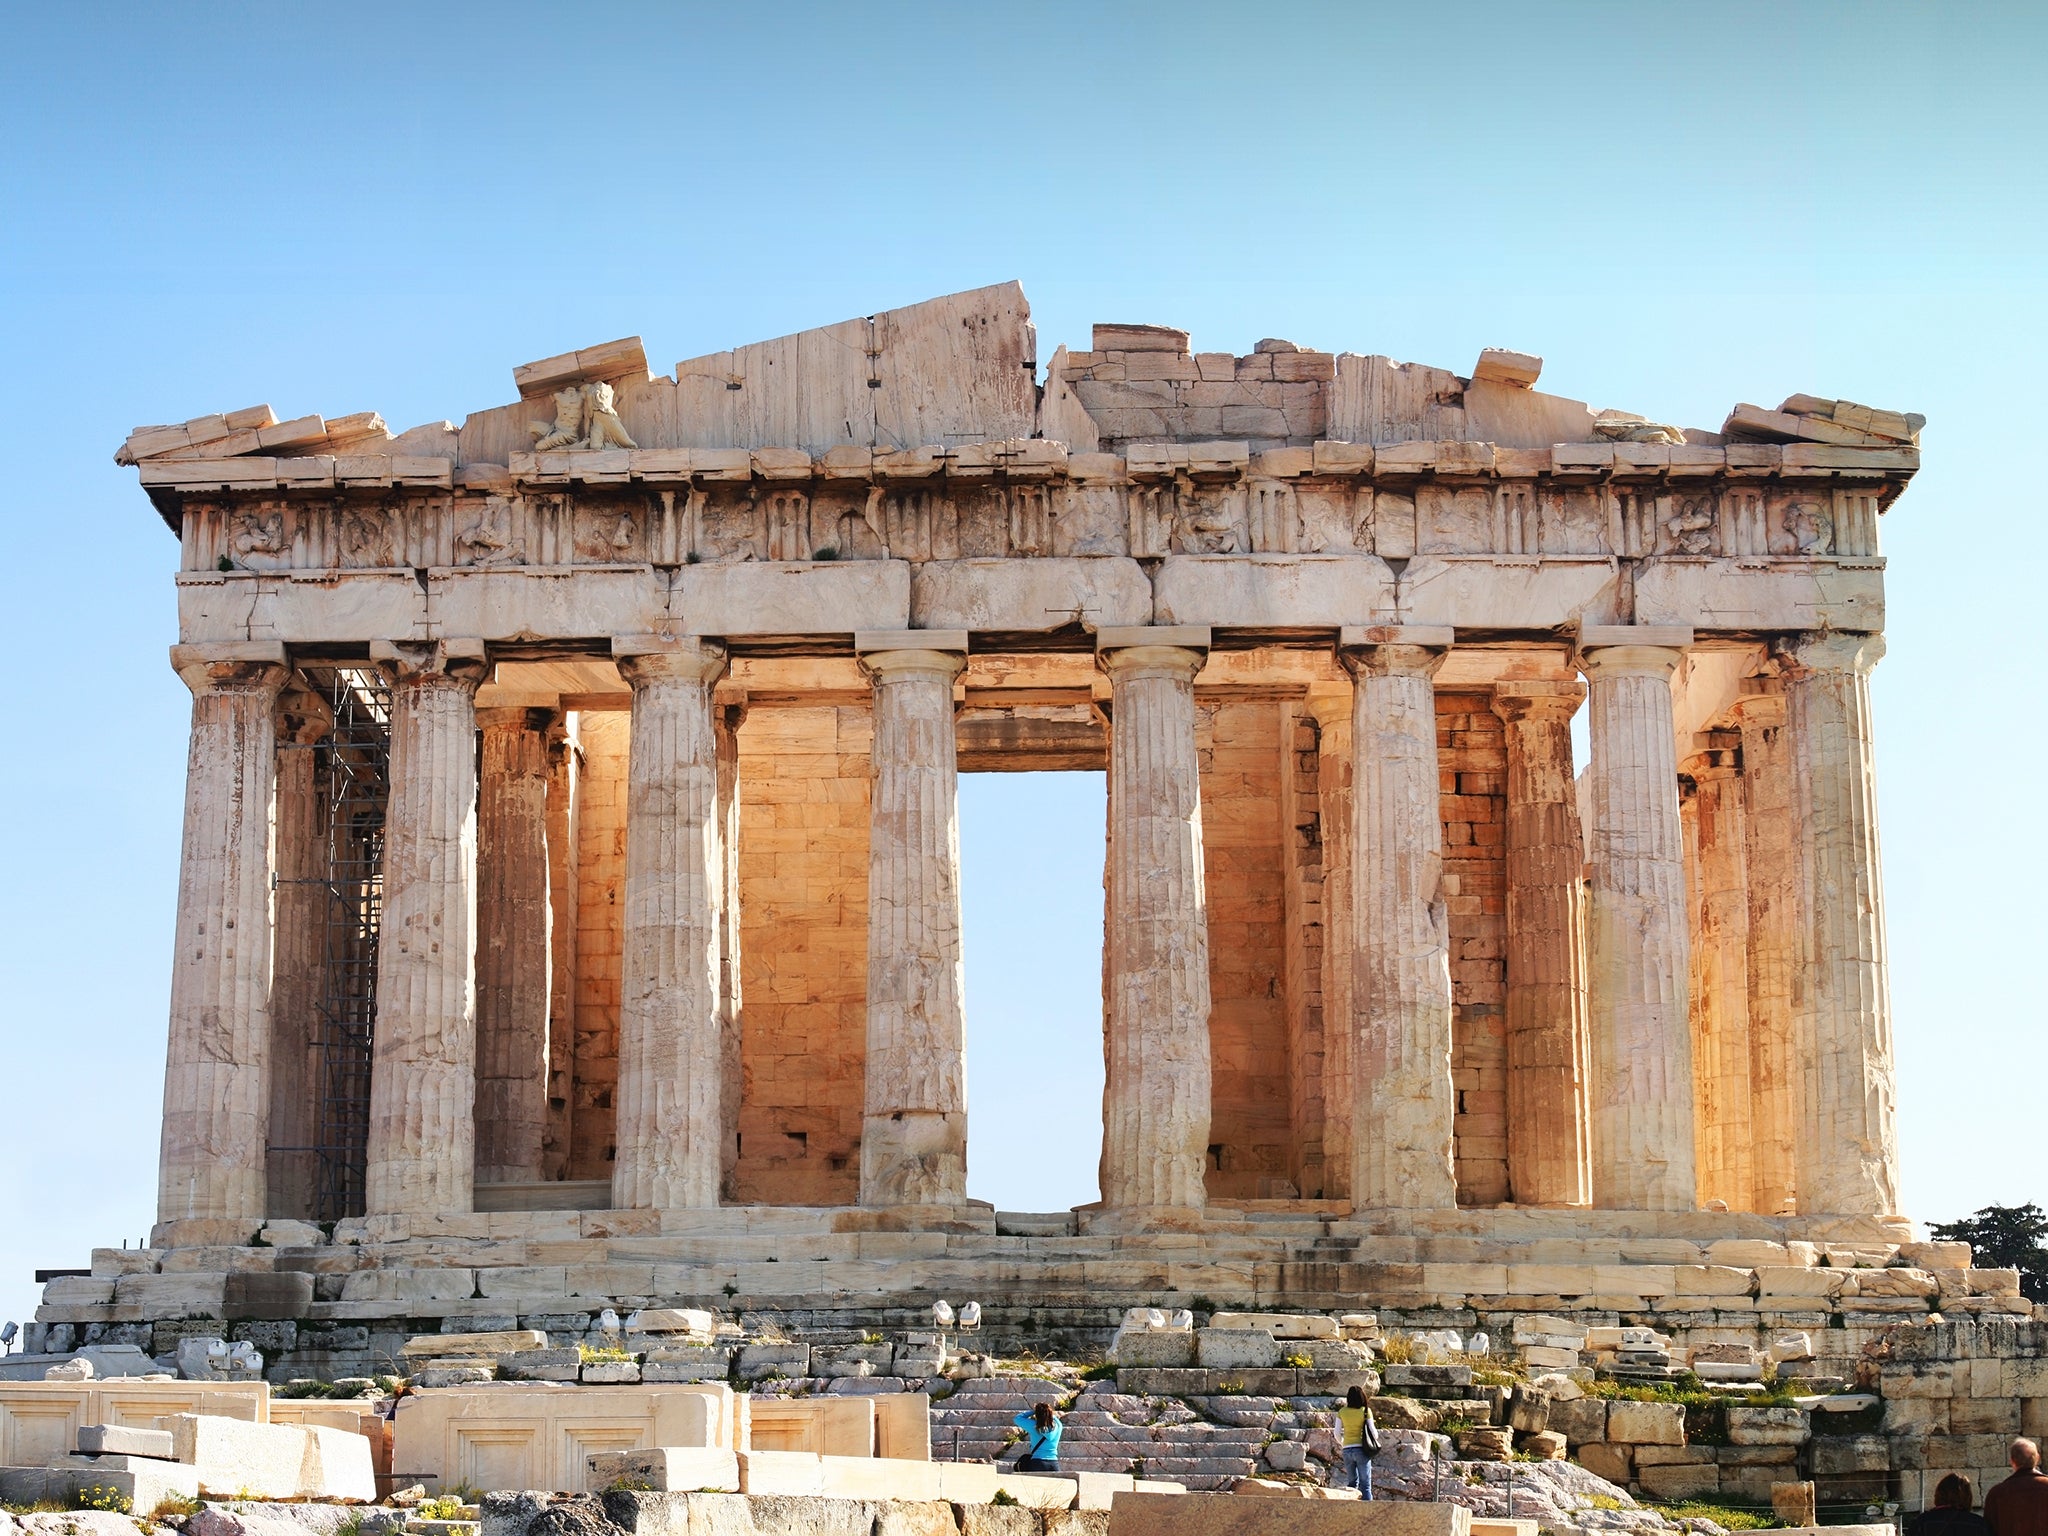 The Parthenon at the time was part of a Turkish garrison, with the sculptures used as target practice